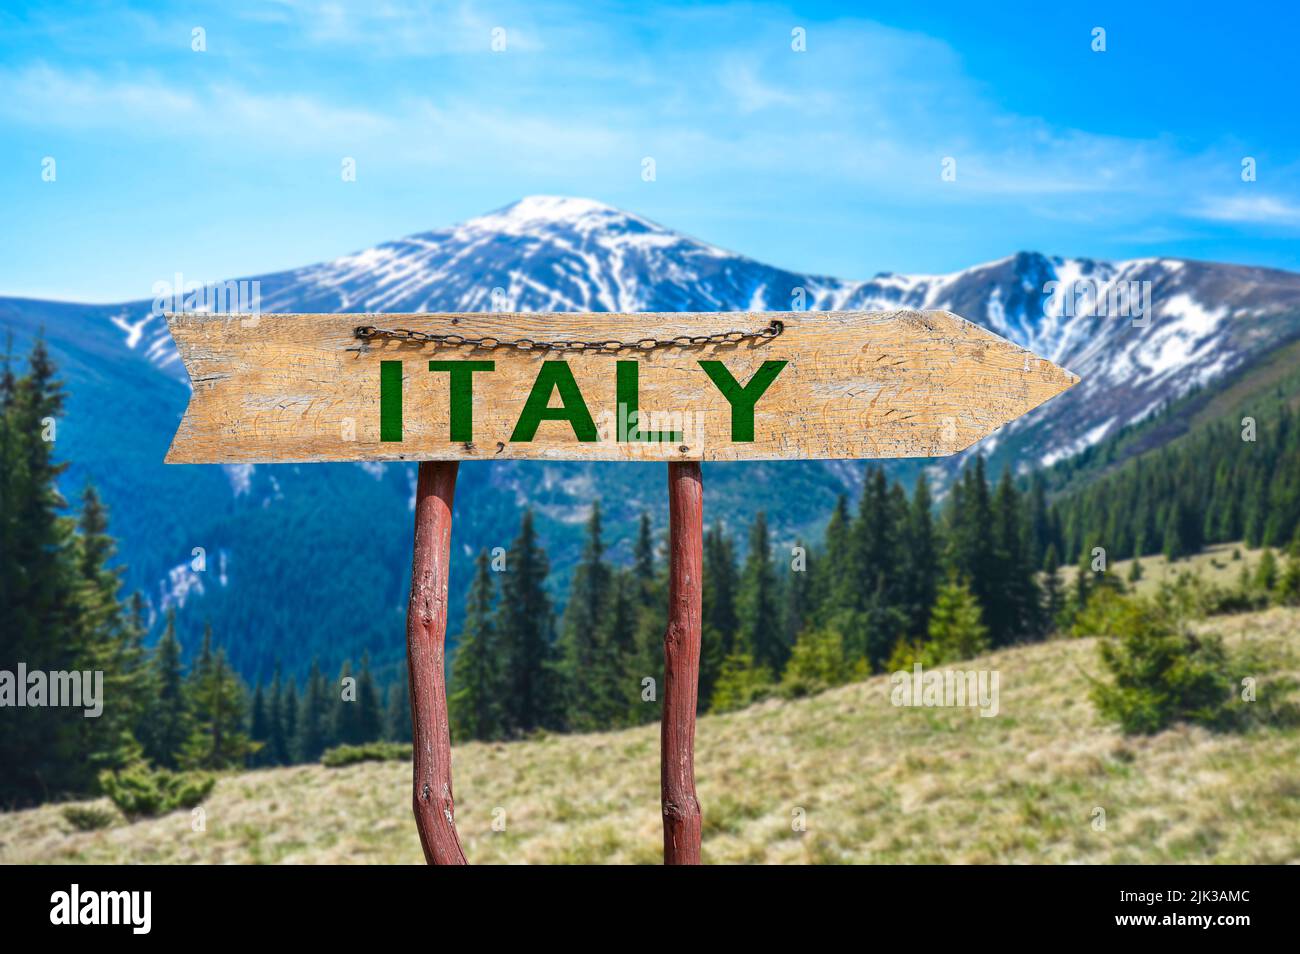 Italy wooden arrow road sign against mountains landscape. Stock Photo